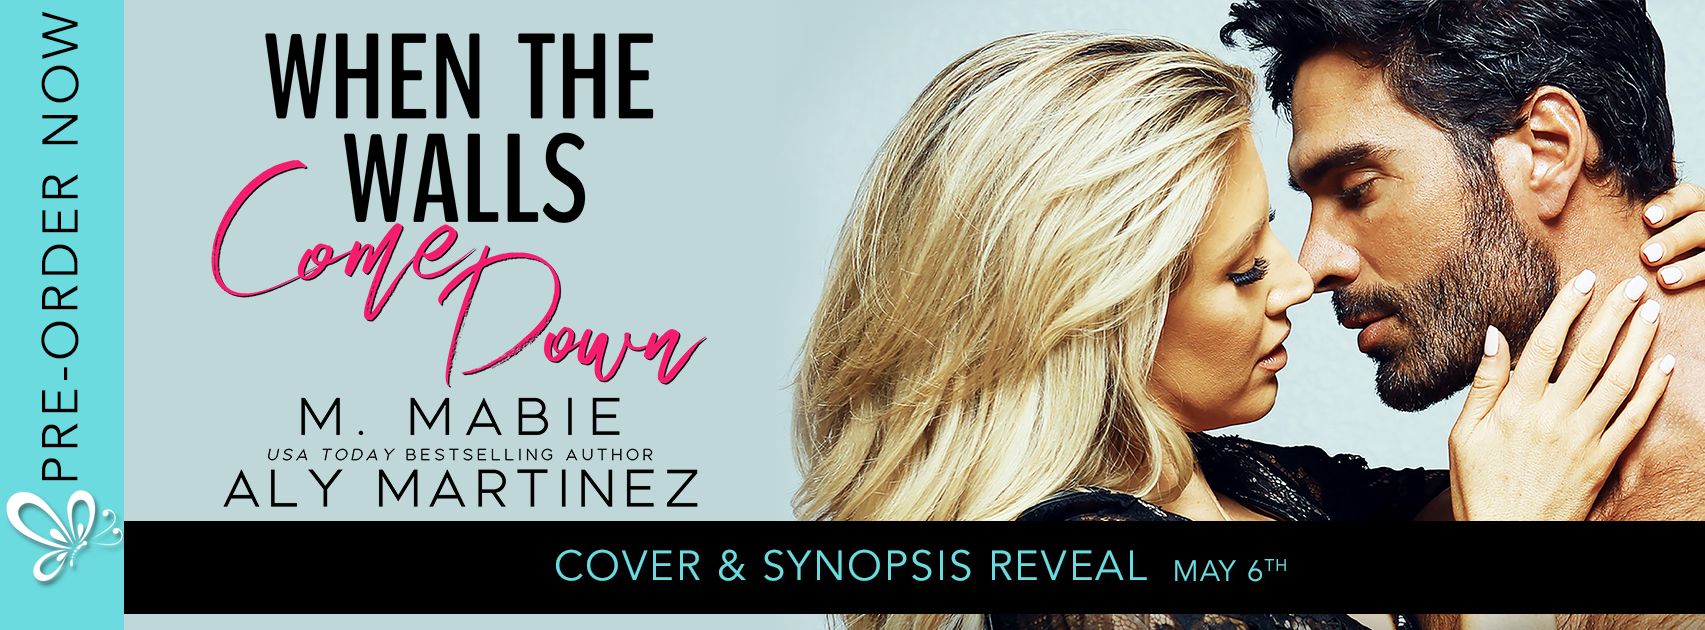 Cover Reveal: When the Walls Come Down by Aly Martinez and M. Mabie